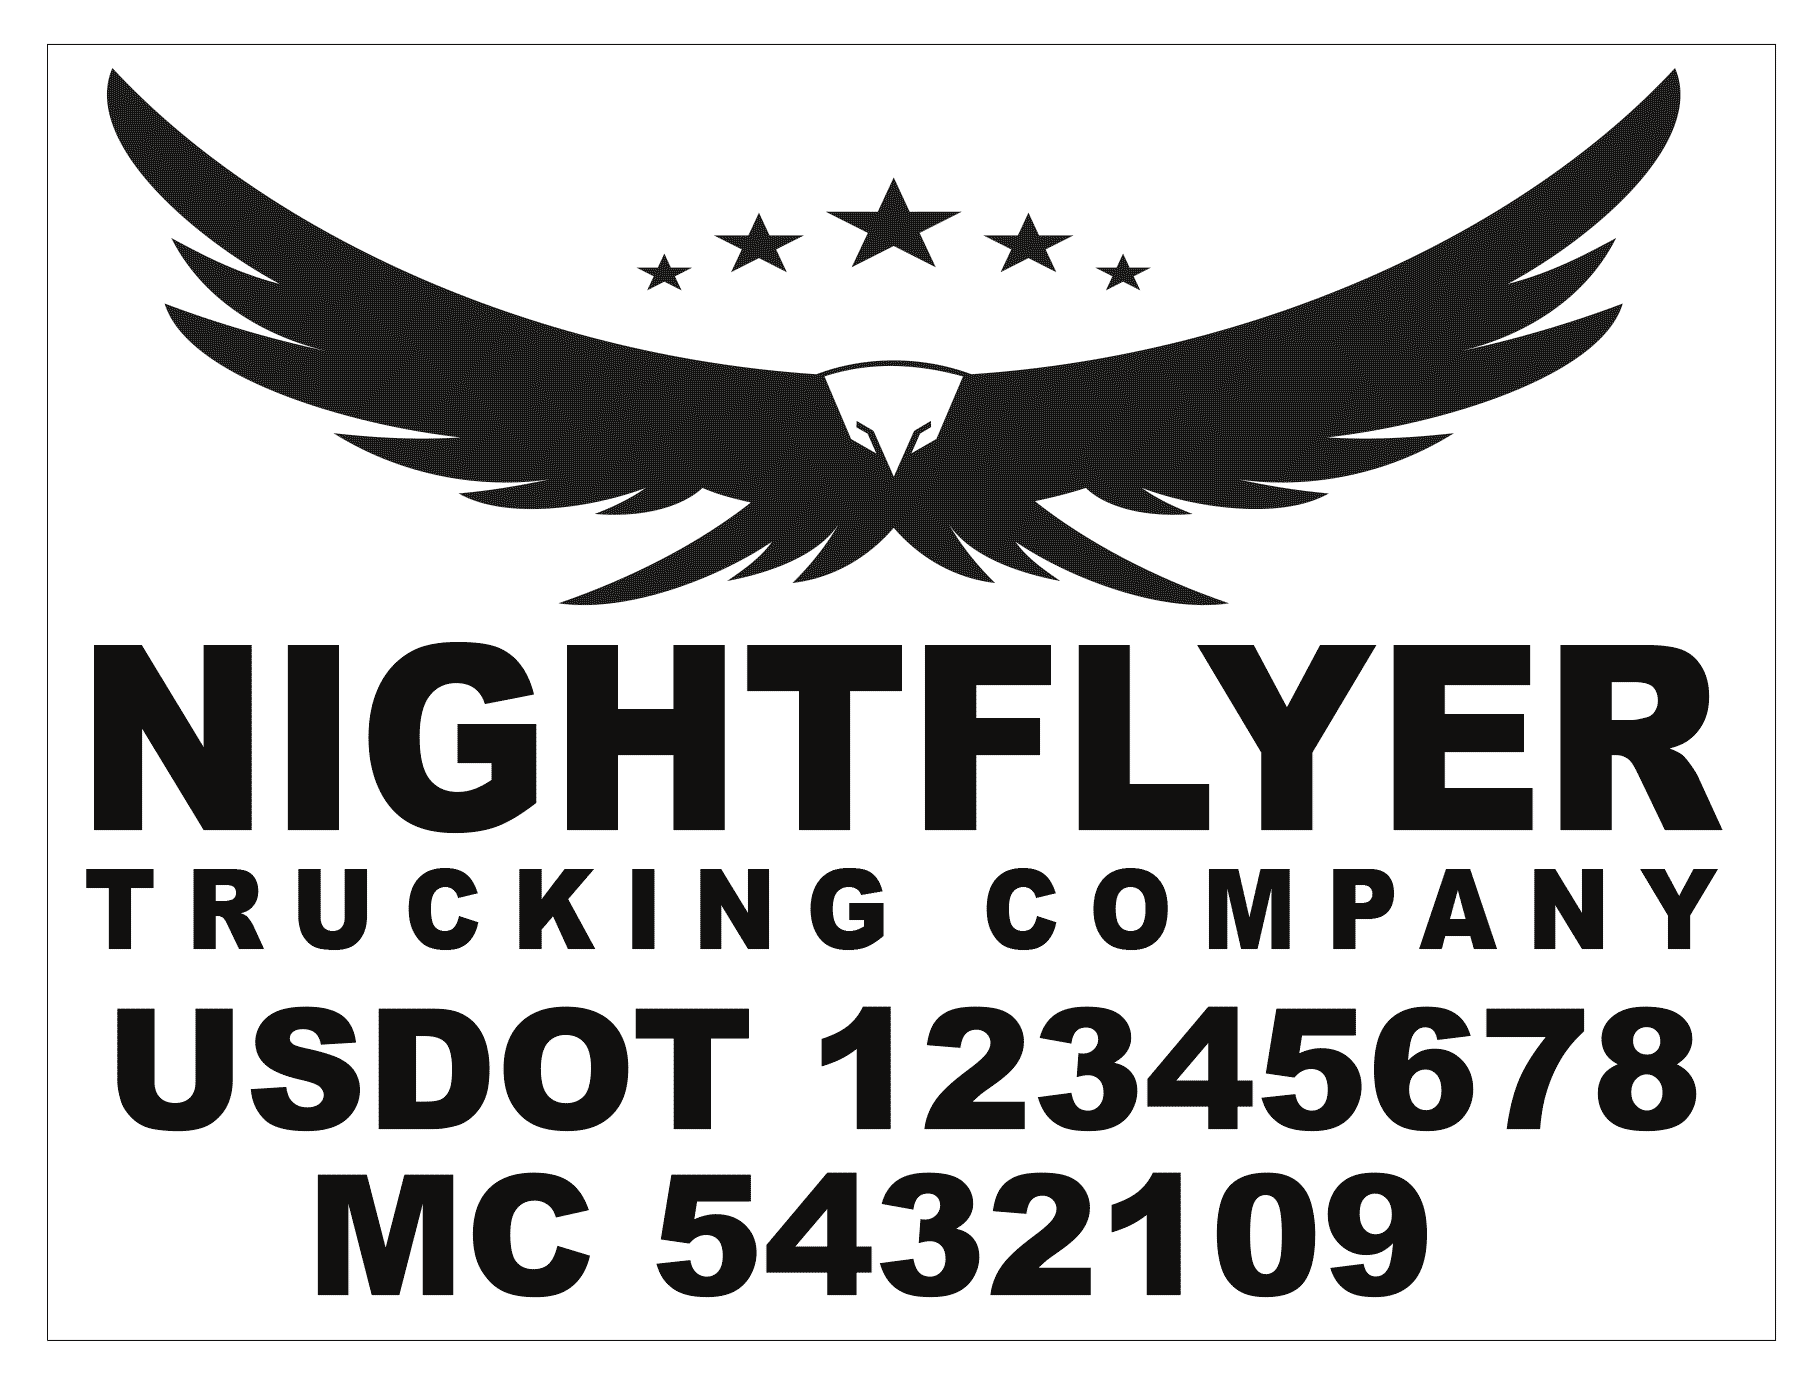 24x12 USDOT Compliant Number Vinyl Sticker from $16. Ships Free